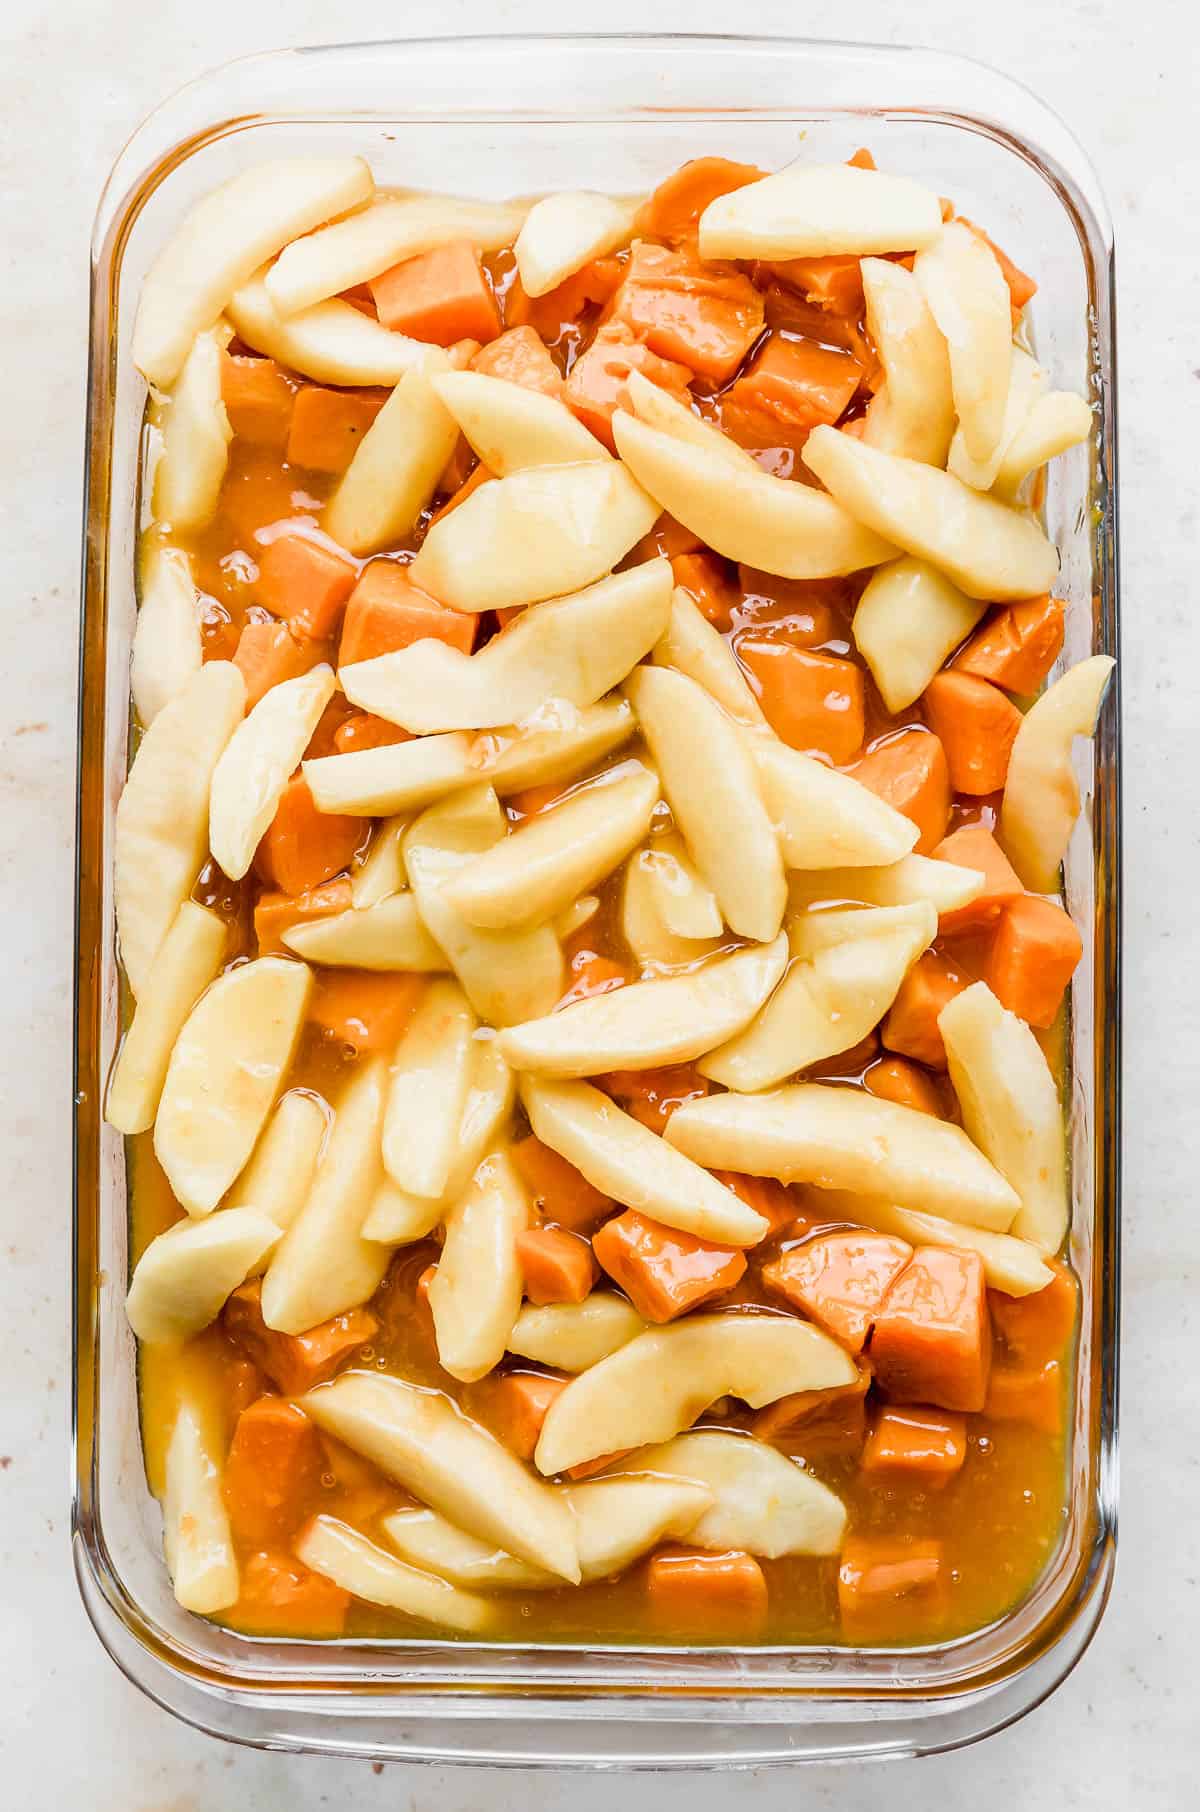 Candied Yams with Apples in a glass baking dish.